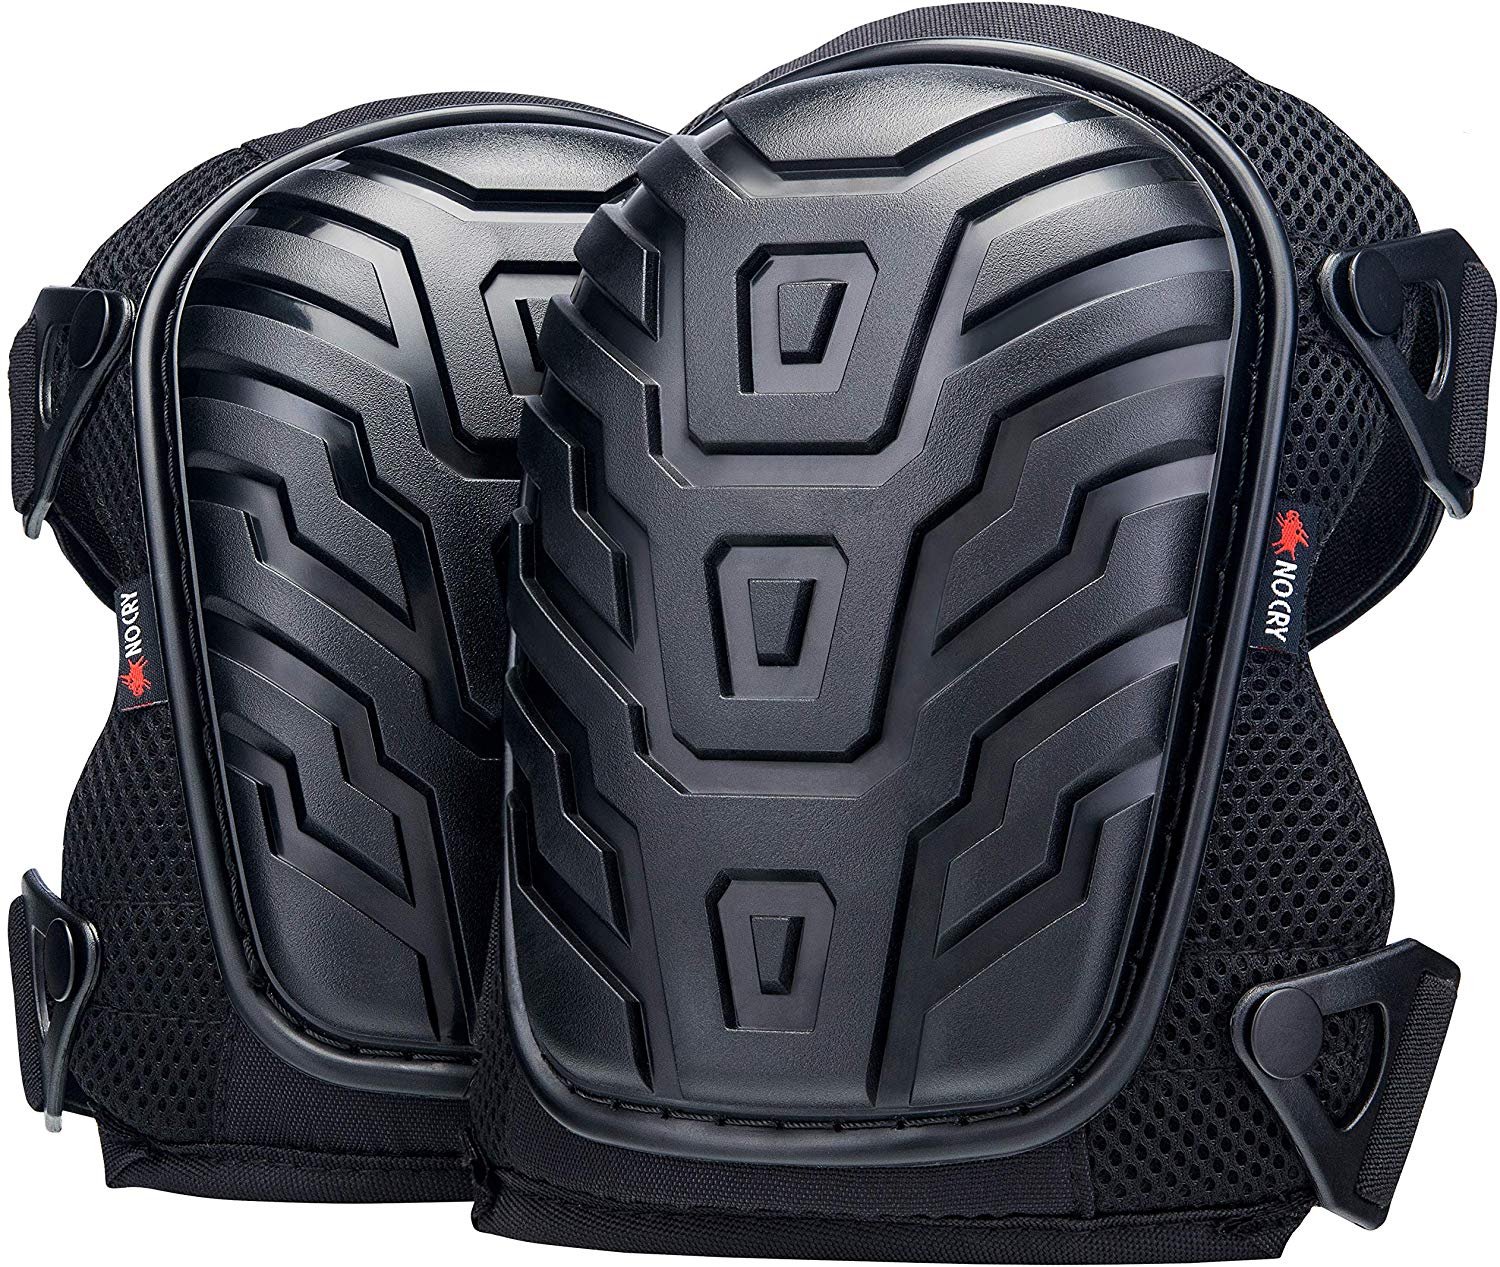 NoCry Professional Knee Pads